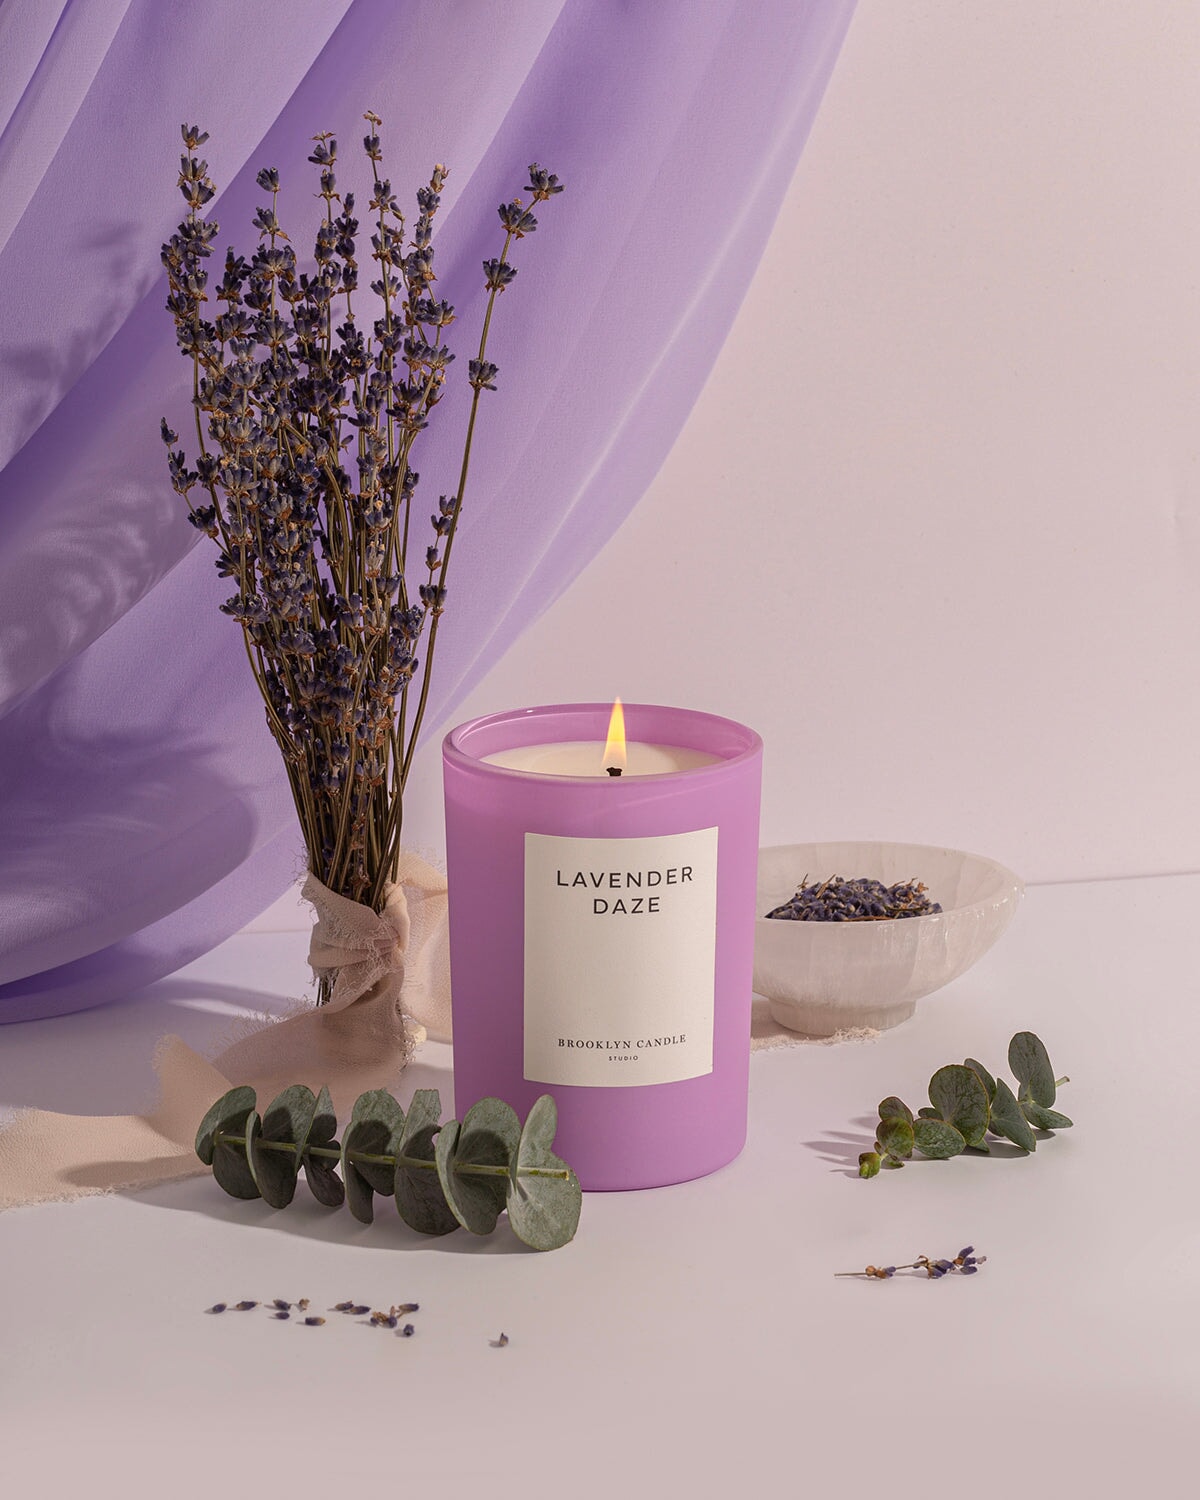 Lavender Daze Limited Edition Candle Lilac Haze Collection Brooklyn Candle Studio 